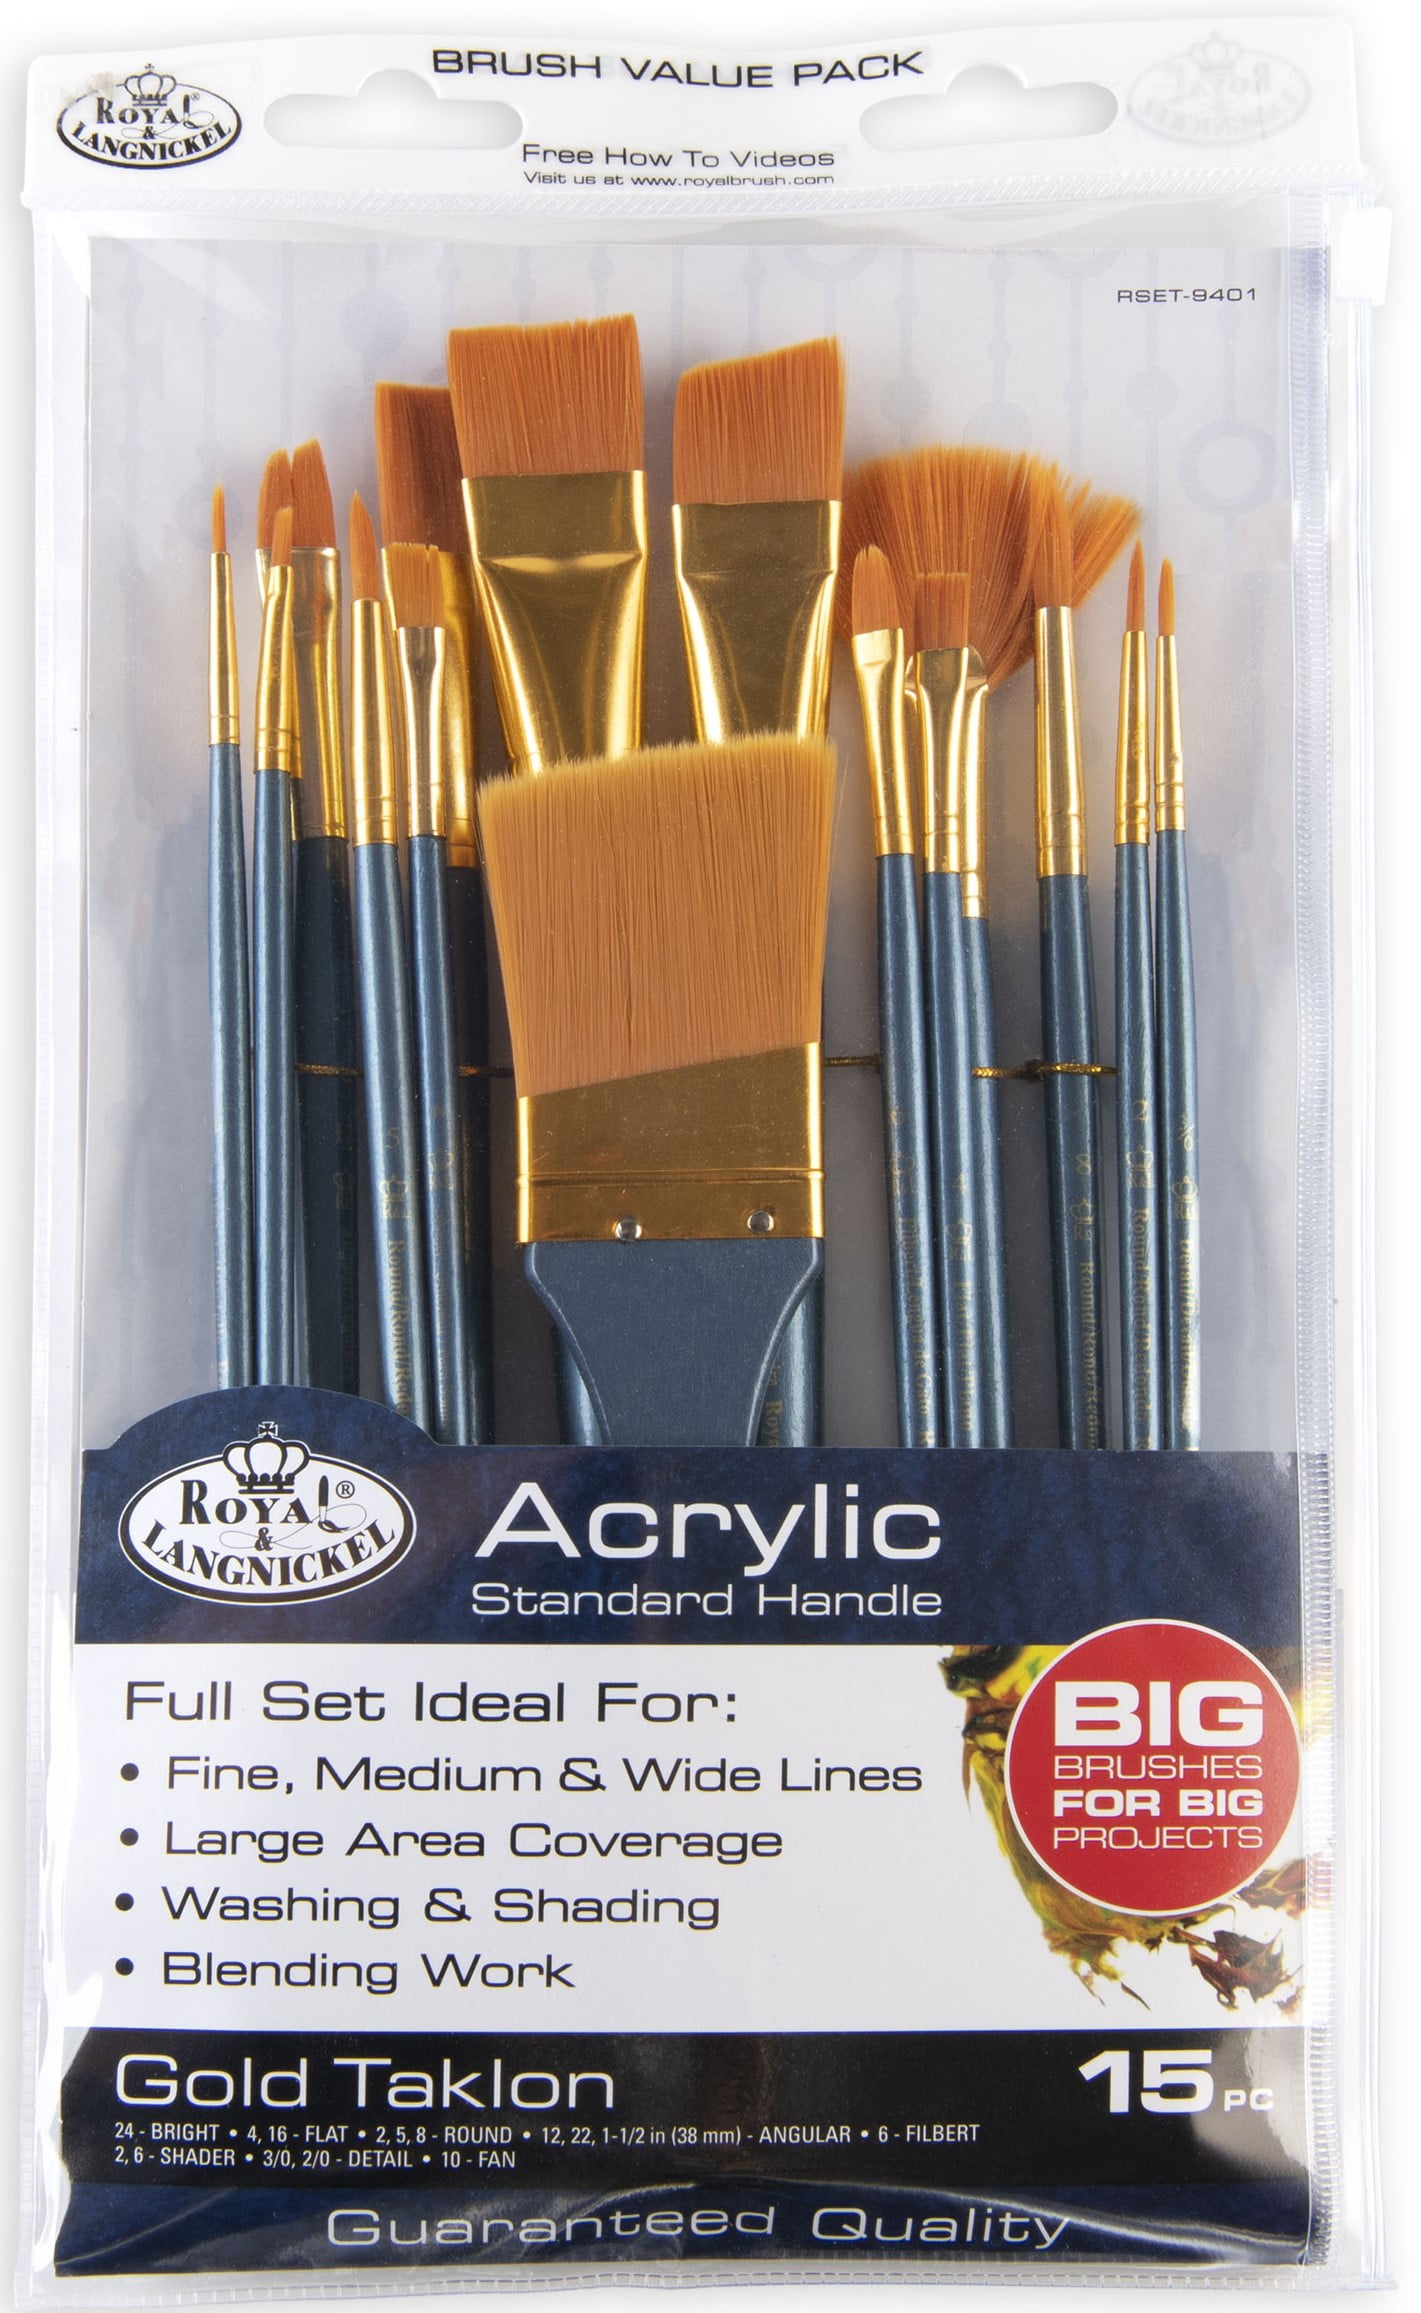  Micro Mini Fine Detail Paint Brush Set of 12 Pieces, Small  Short Handle Taklon Bristles for Detailing, Paint by Number Art, Models &  Nails